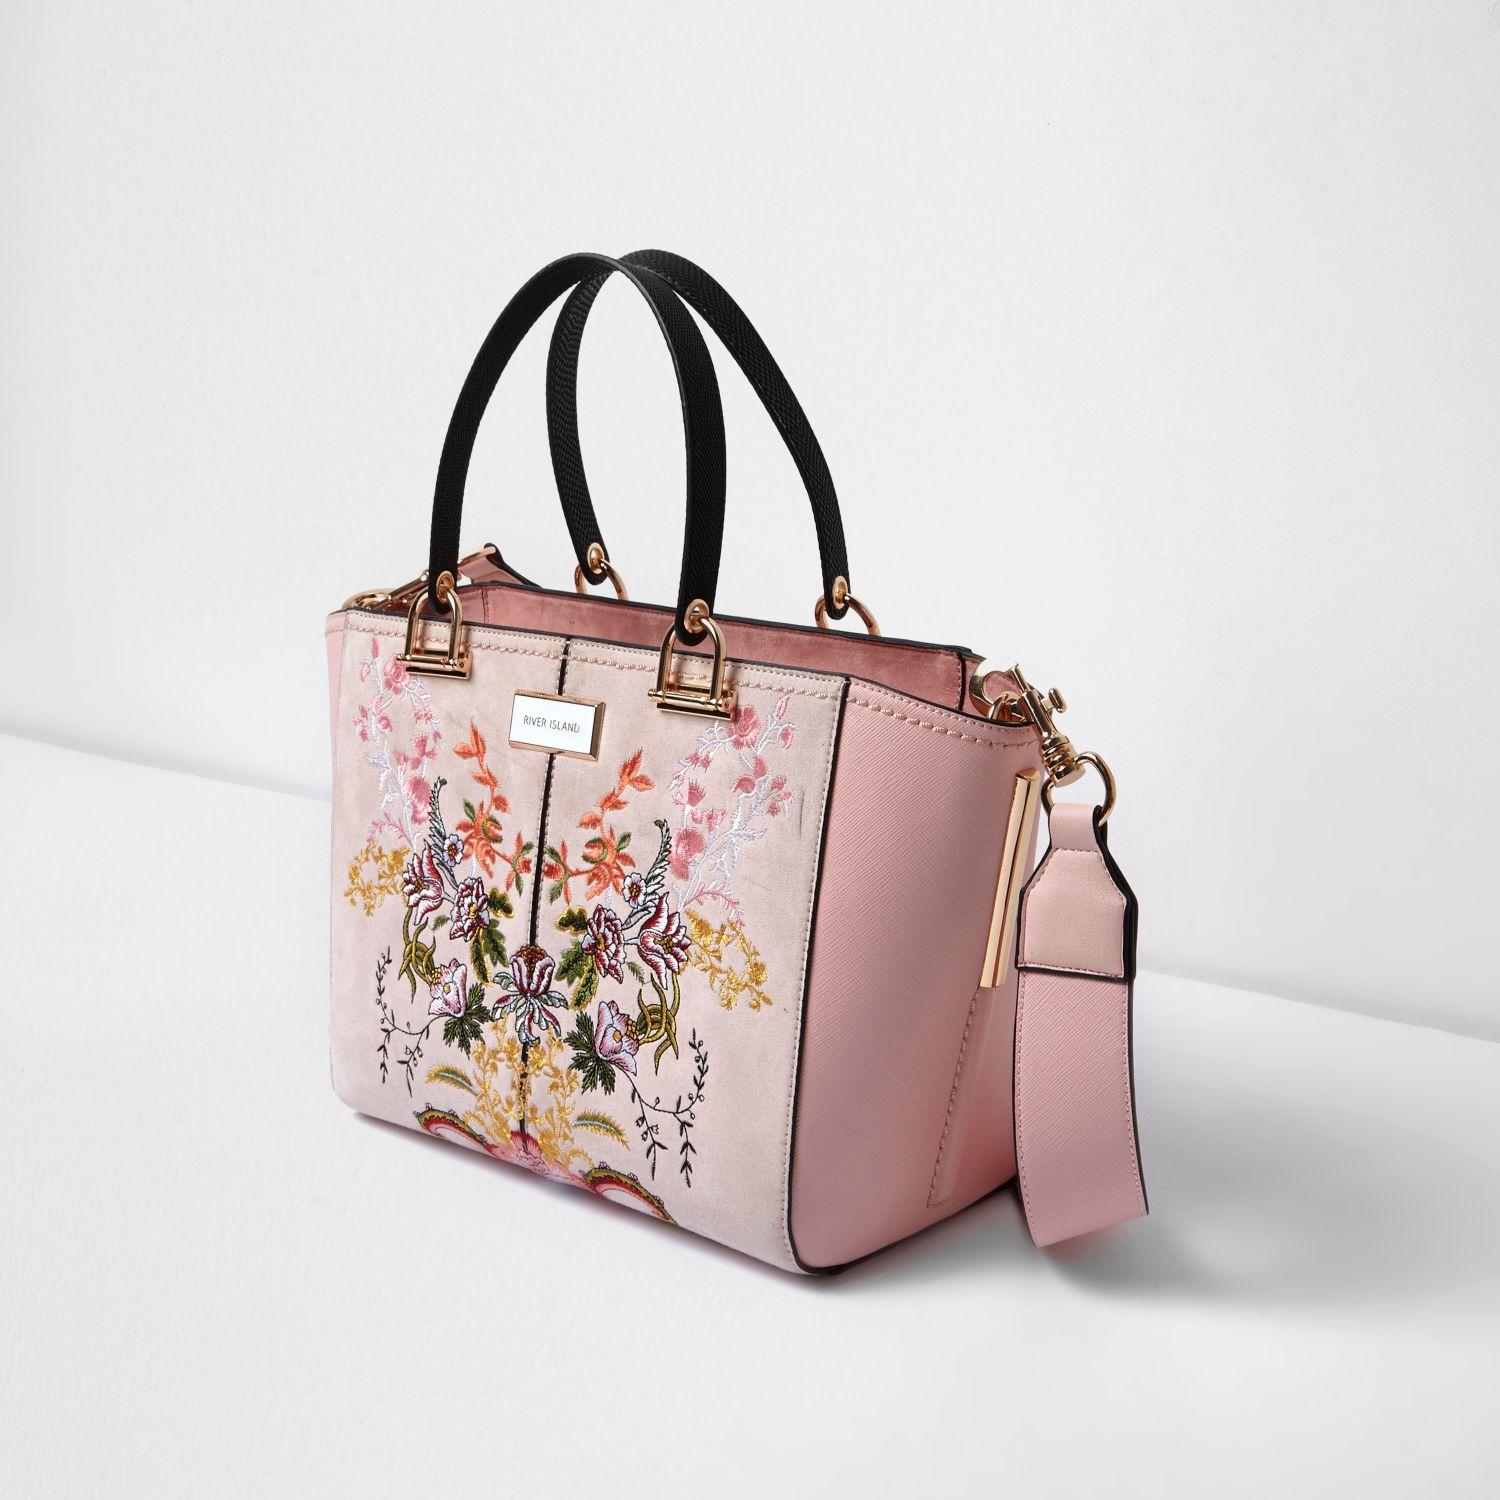 Lyst - River Island Pink Floral Embroidered Tote Bag in Pink